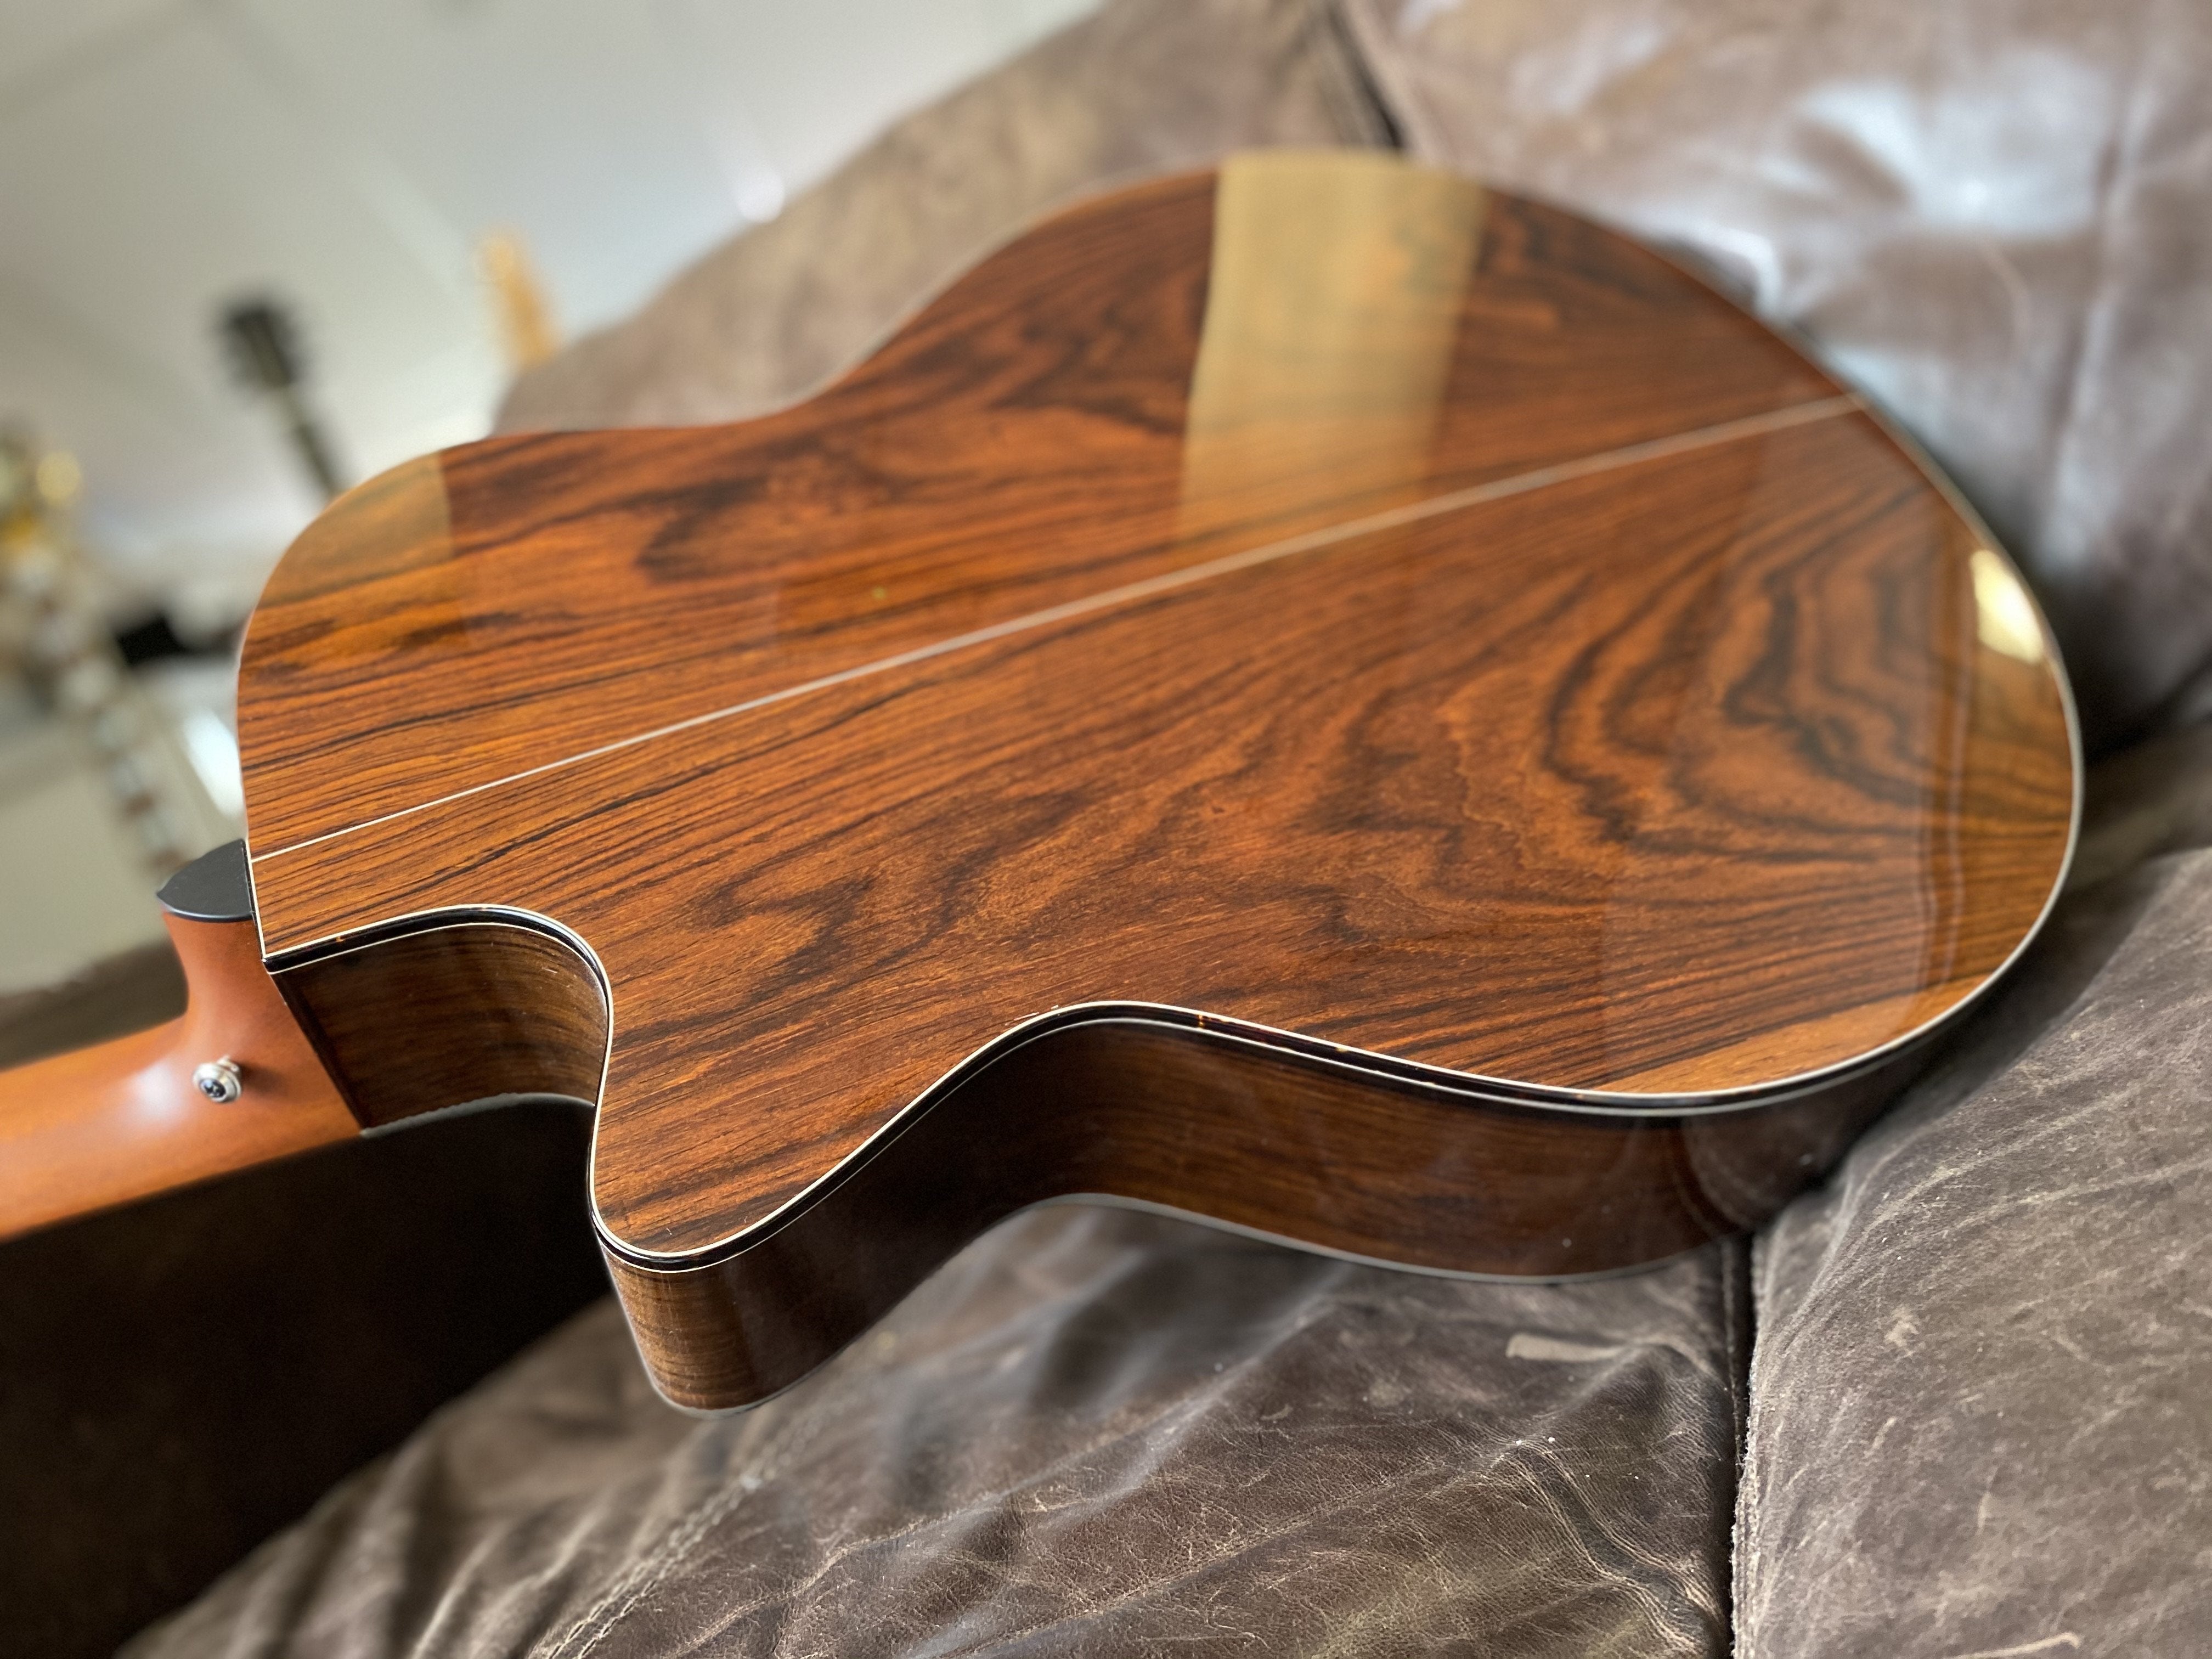 Furch Rainbow Series GCSC (Spruce / Cocobolo), Acoustic Guitar for sale at Richards Guitars.